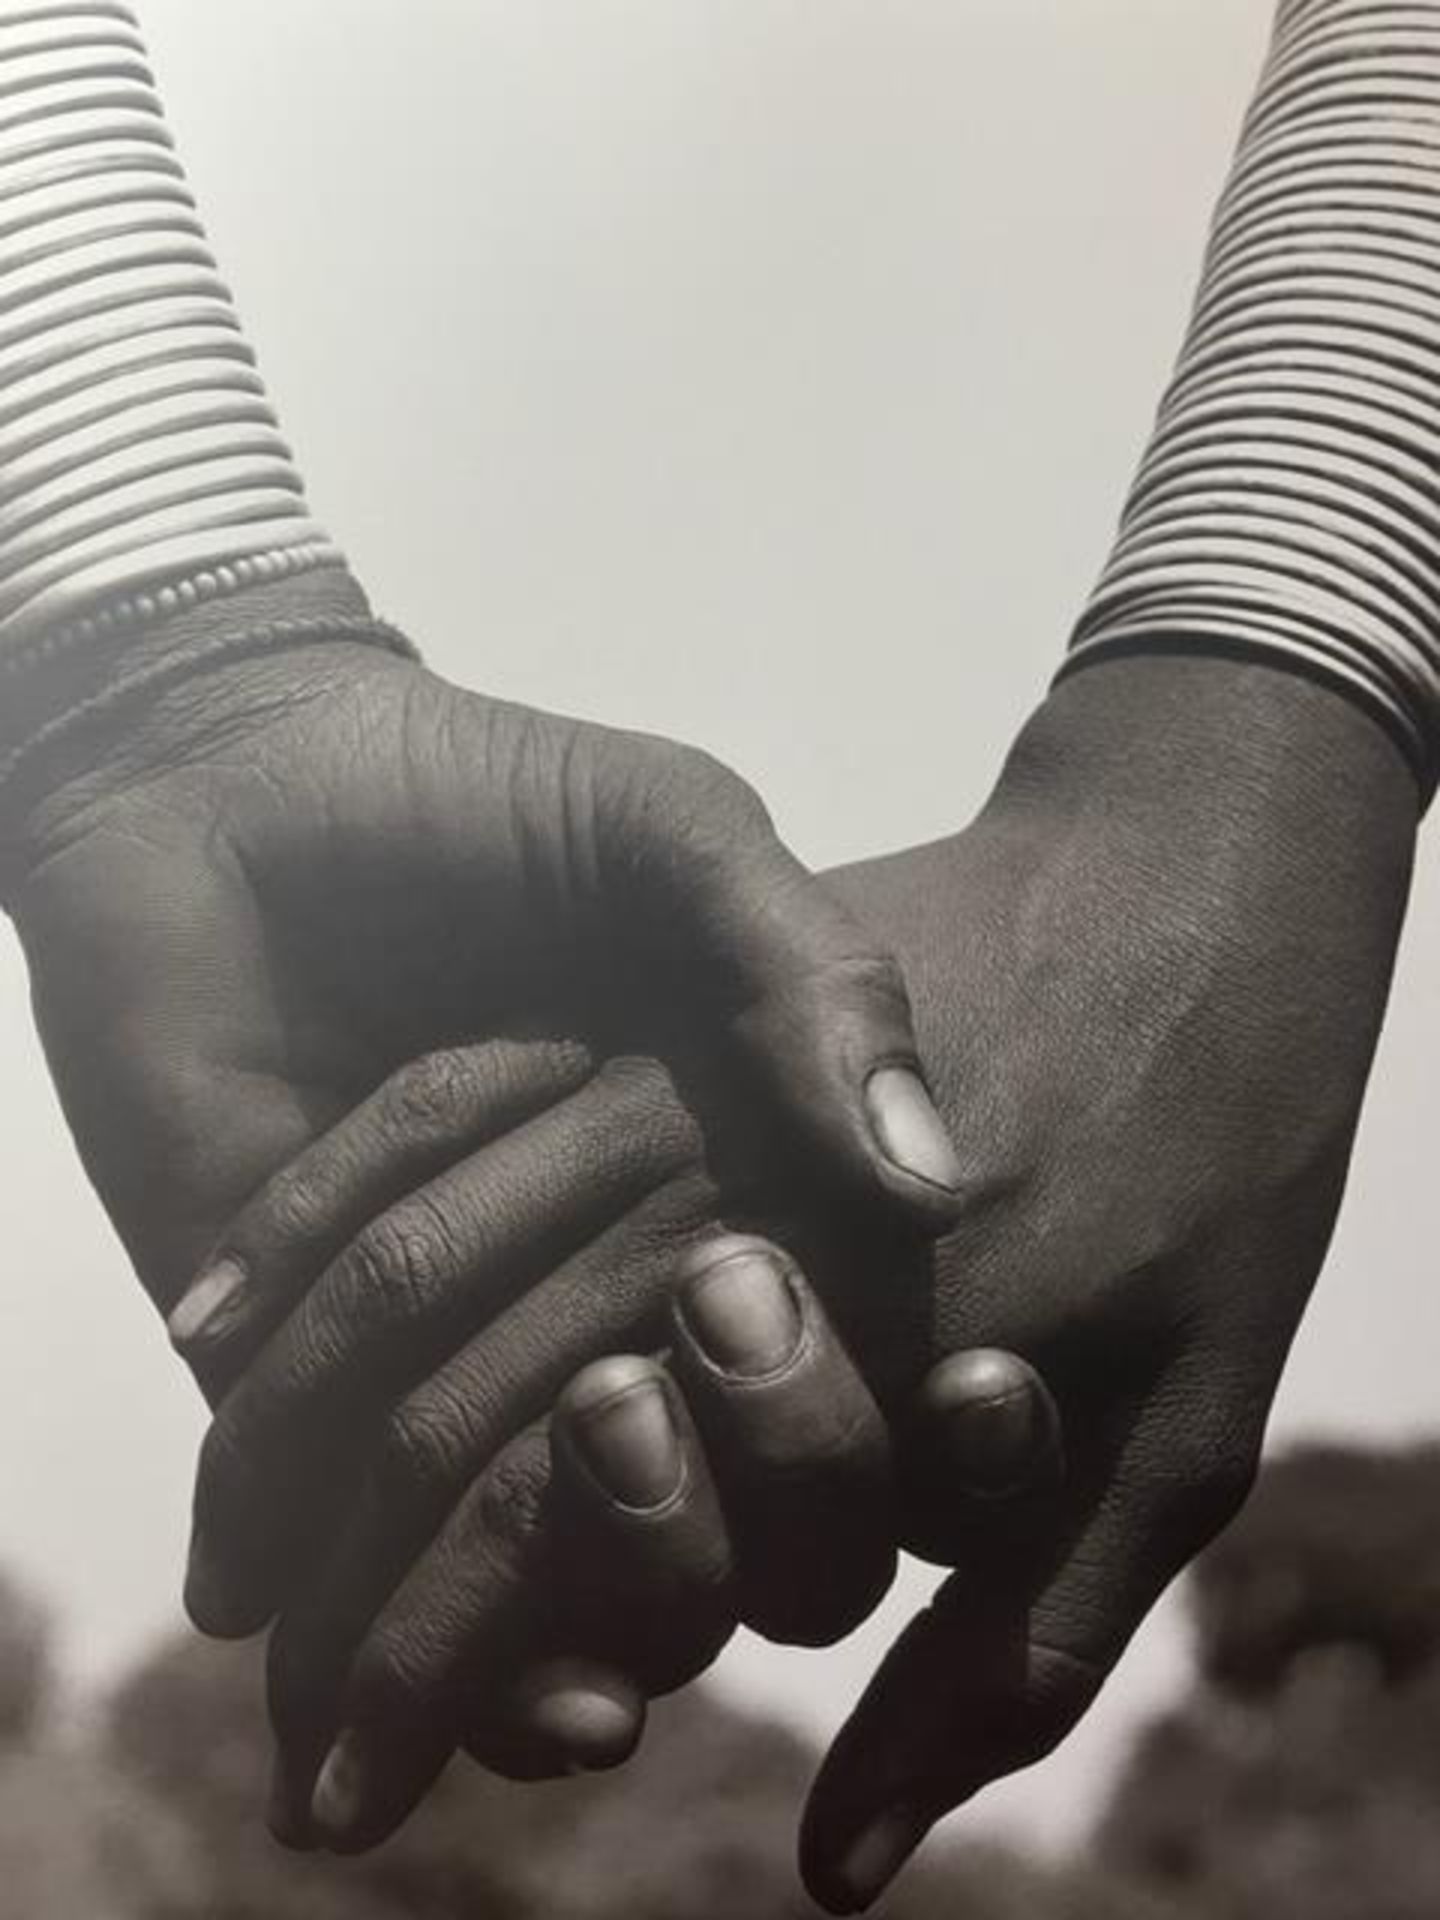 Herb Ritts "Untitled" Print. - Image 2 of 12